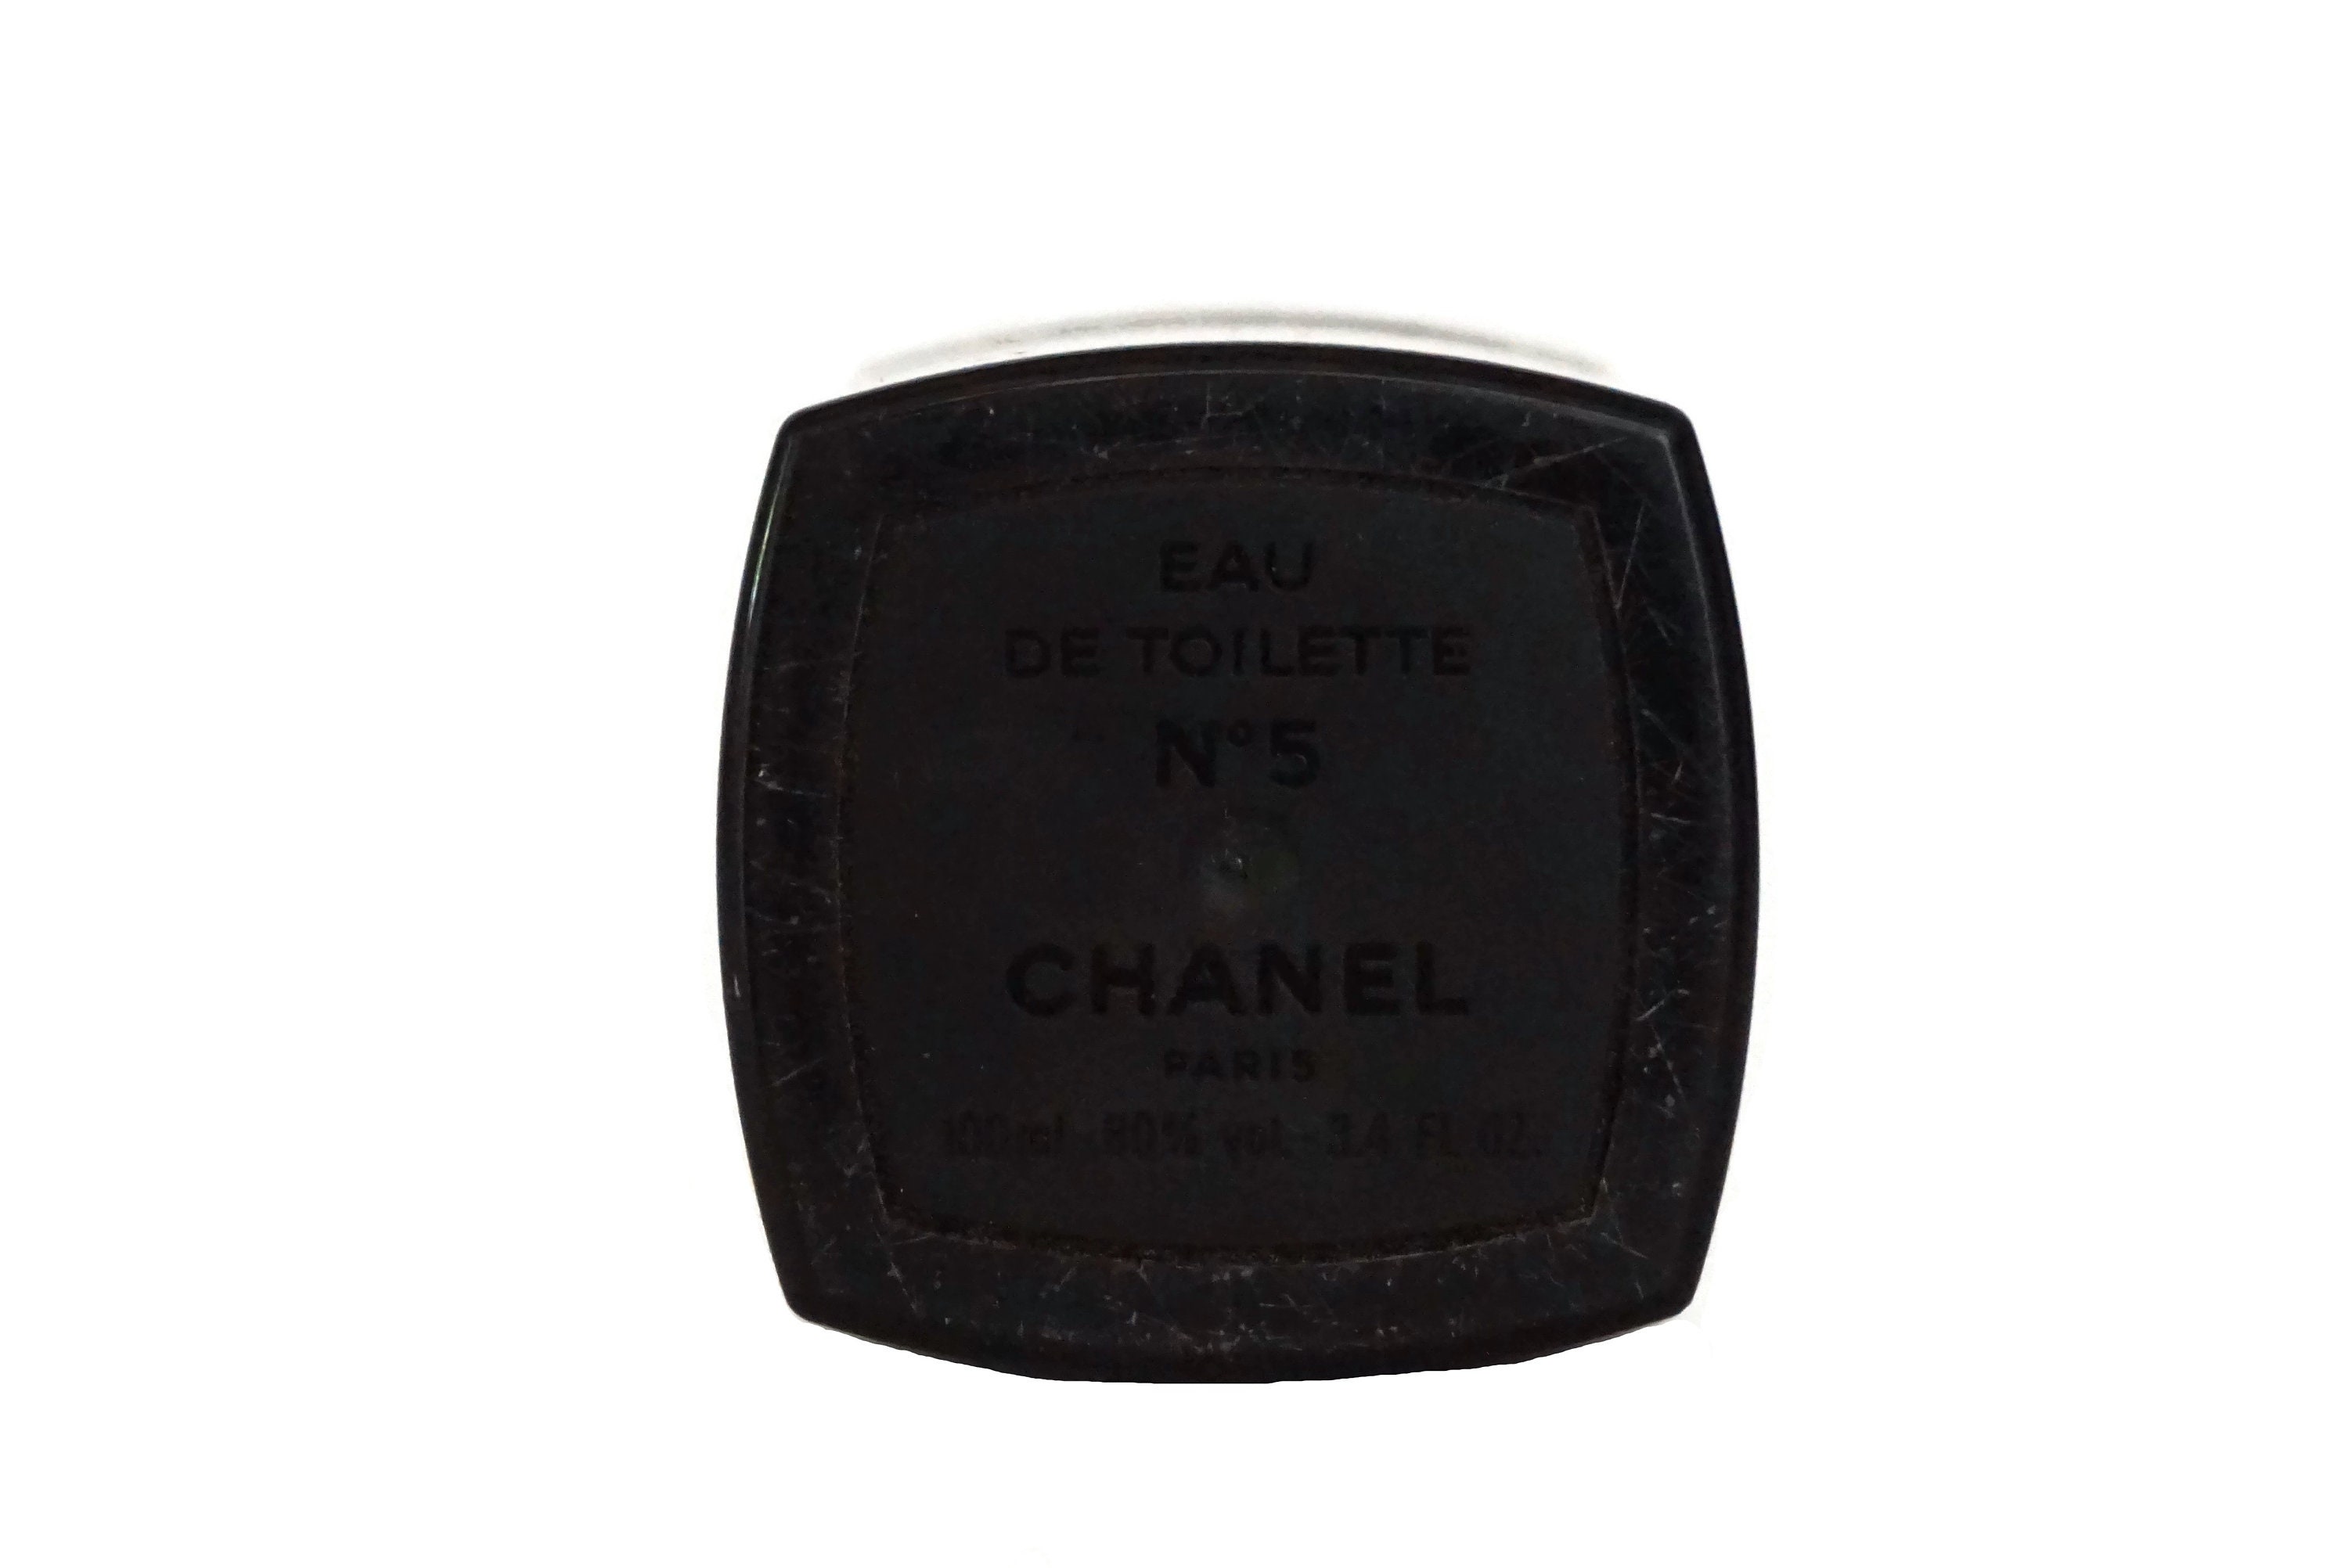 Chanel No. 5 EDT Perfume Refill Bottle Container, 100ml French Atomizer Case